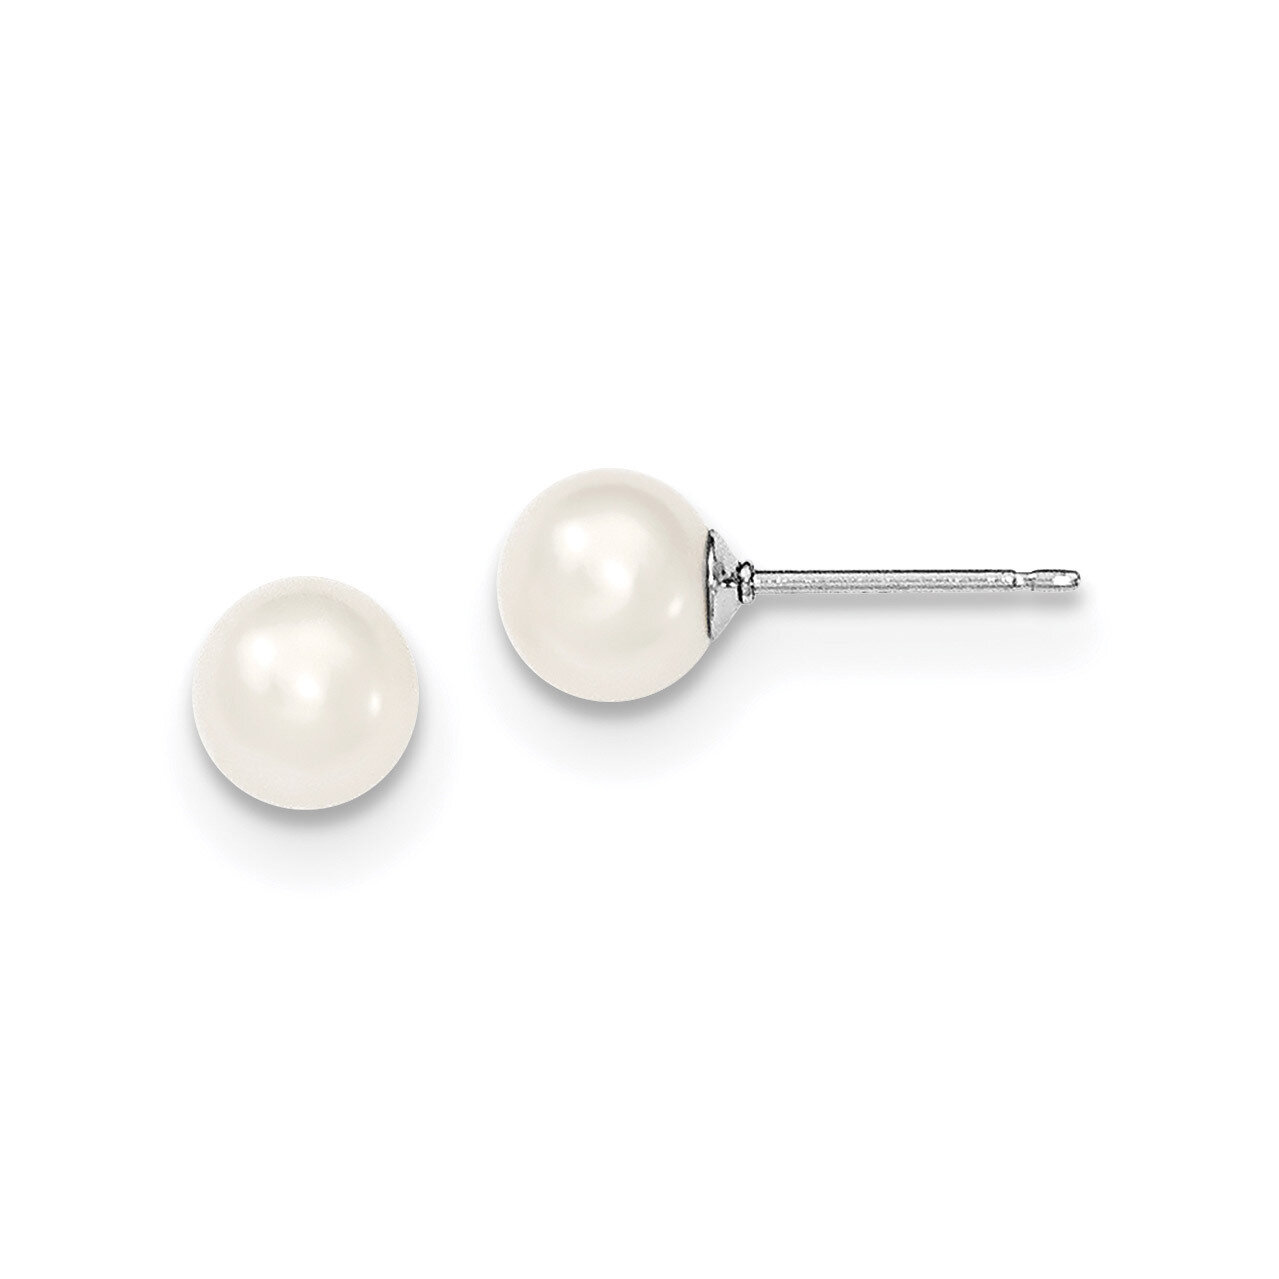 6-7mm White Freshwater Cultured Round Pearl Stud Earrings Sterling Silver QE12733